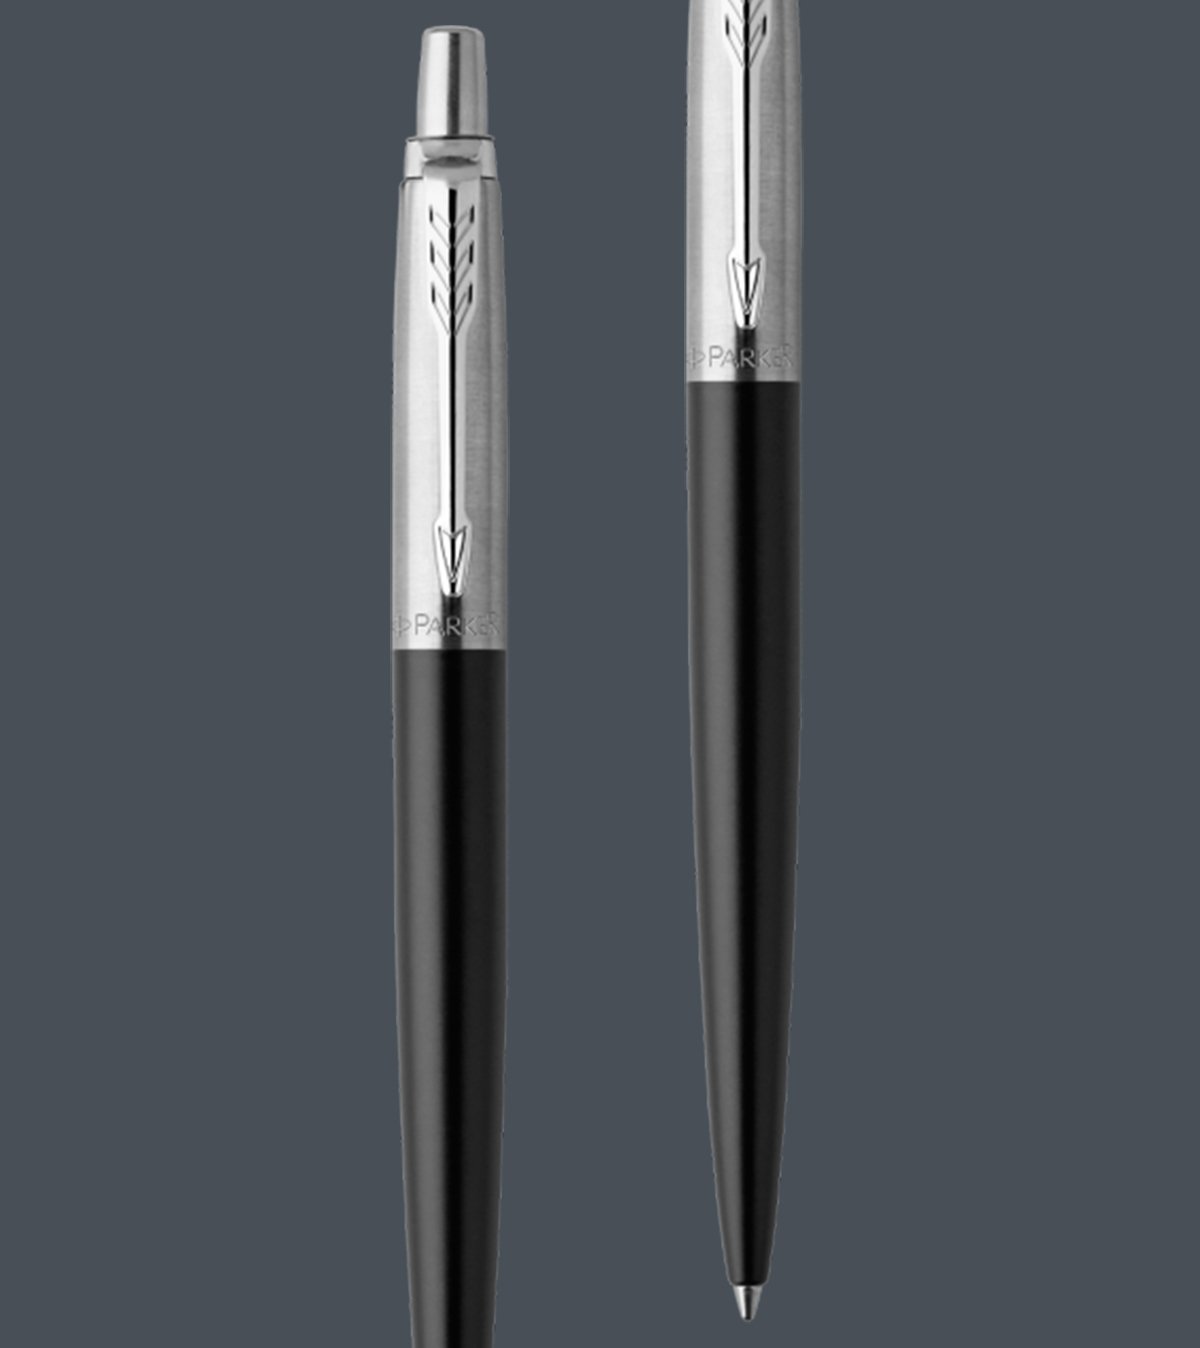 Two upright Jotter ballpoint pens with chrome trim.